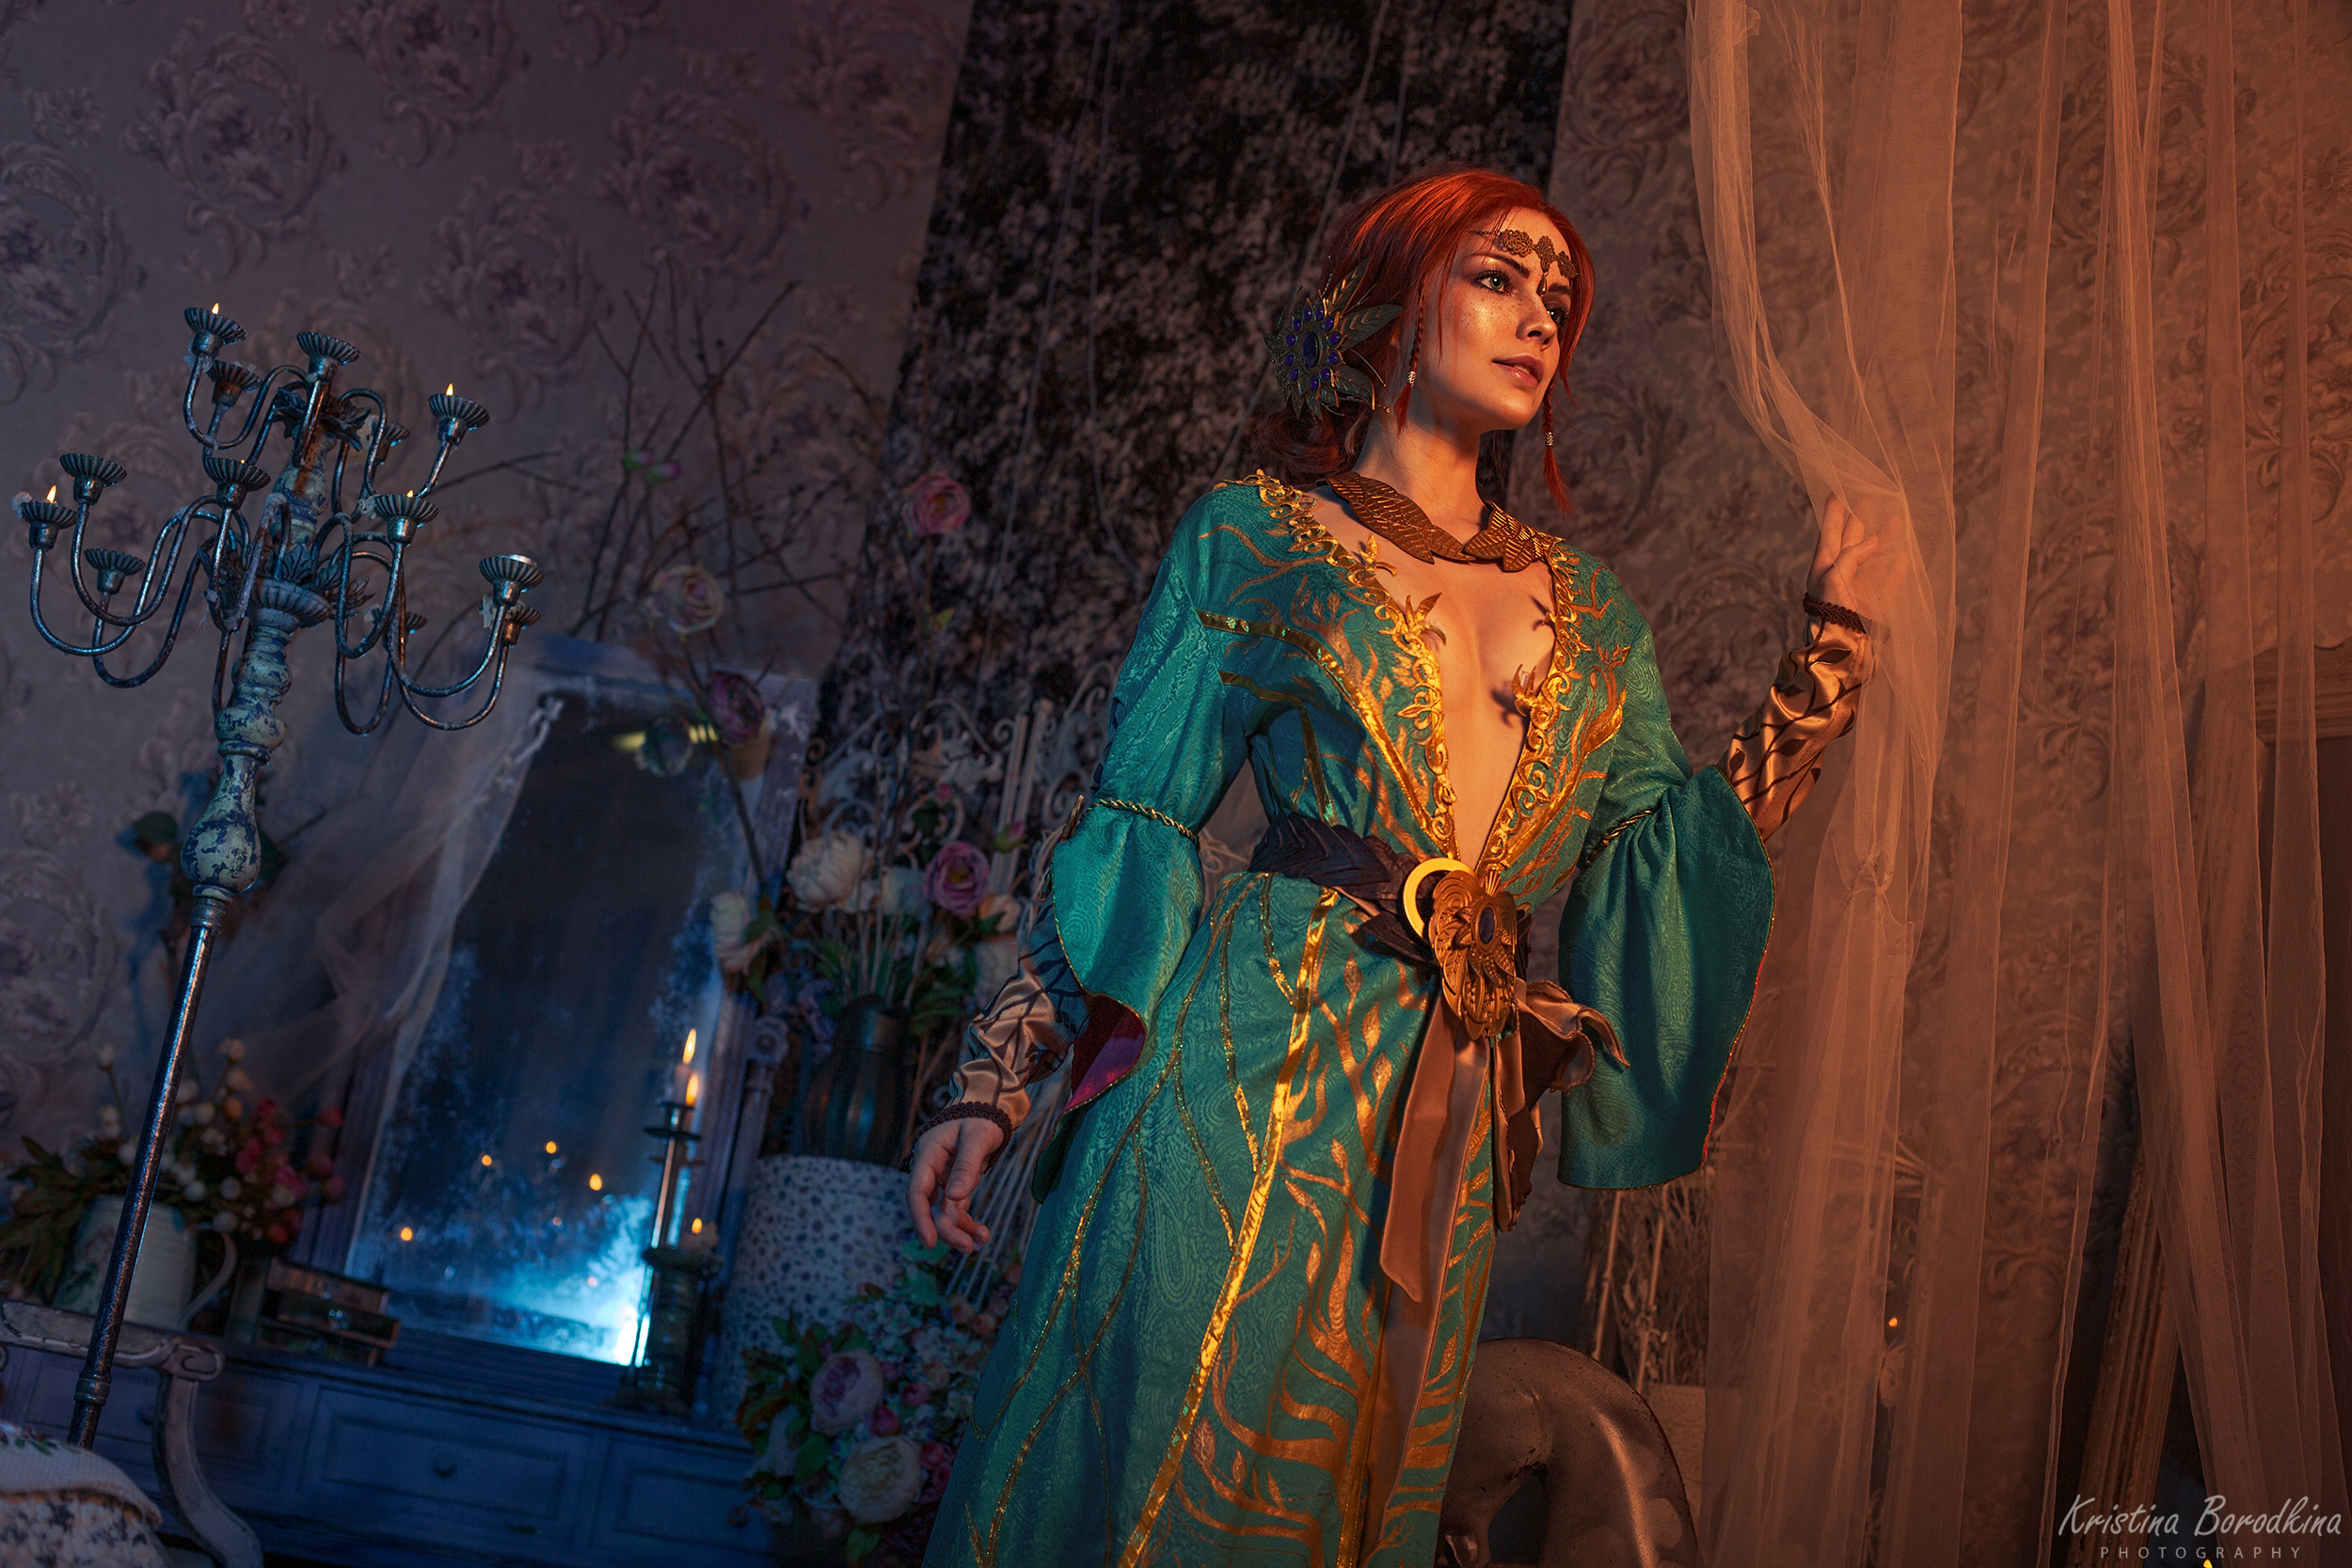 Triss Merigold The Witcher The Witcher 3 Wild Hunt Video Games Video Game Characters Women Redhead D 2500x1667